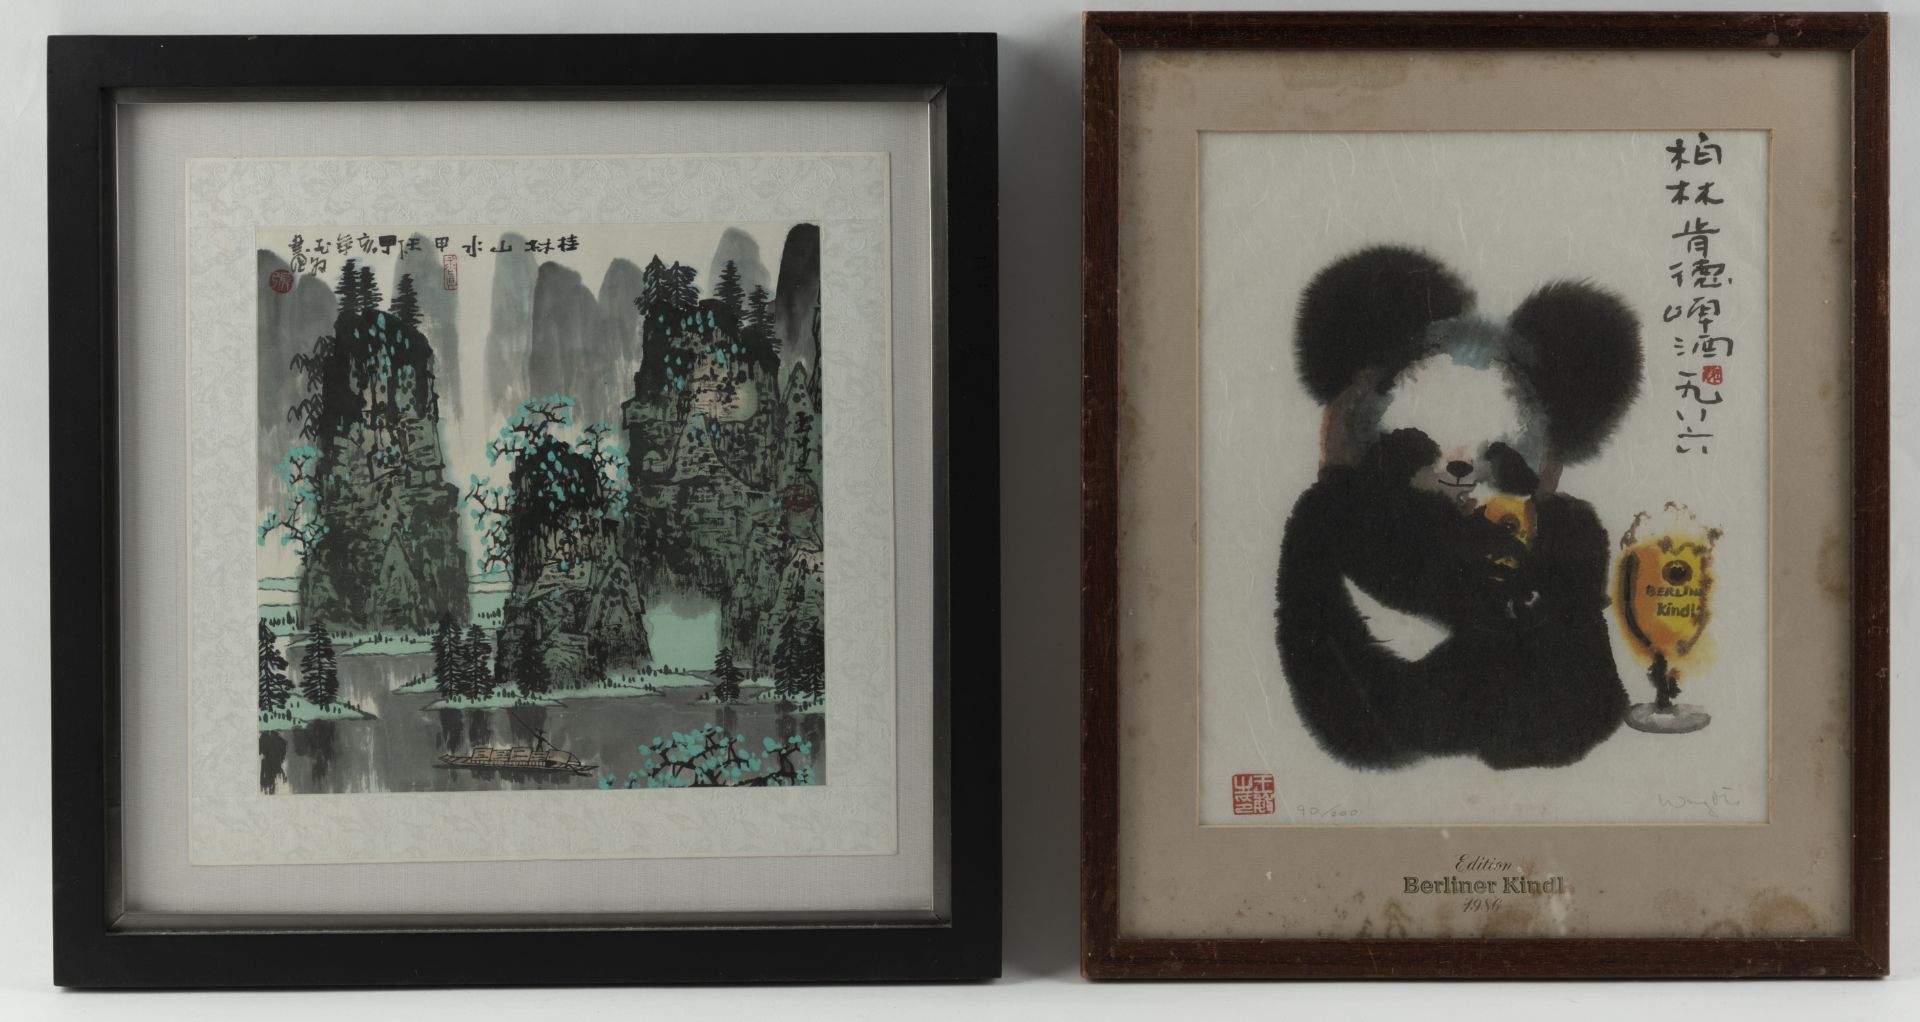 AN ALBUM LEAF WITH GUILIN LANDSCAPE PAINTING AND A POSTER WITH PANDA, BERLINER KINDL 1986 - Image 2 of 5